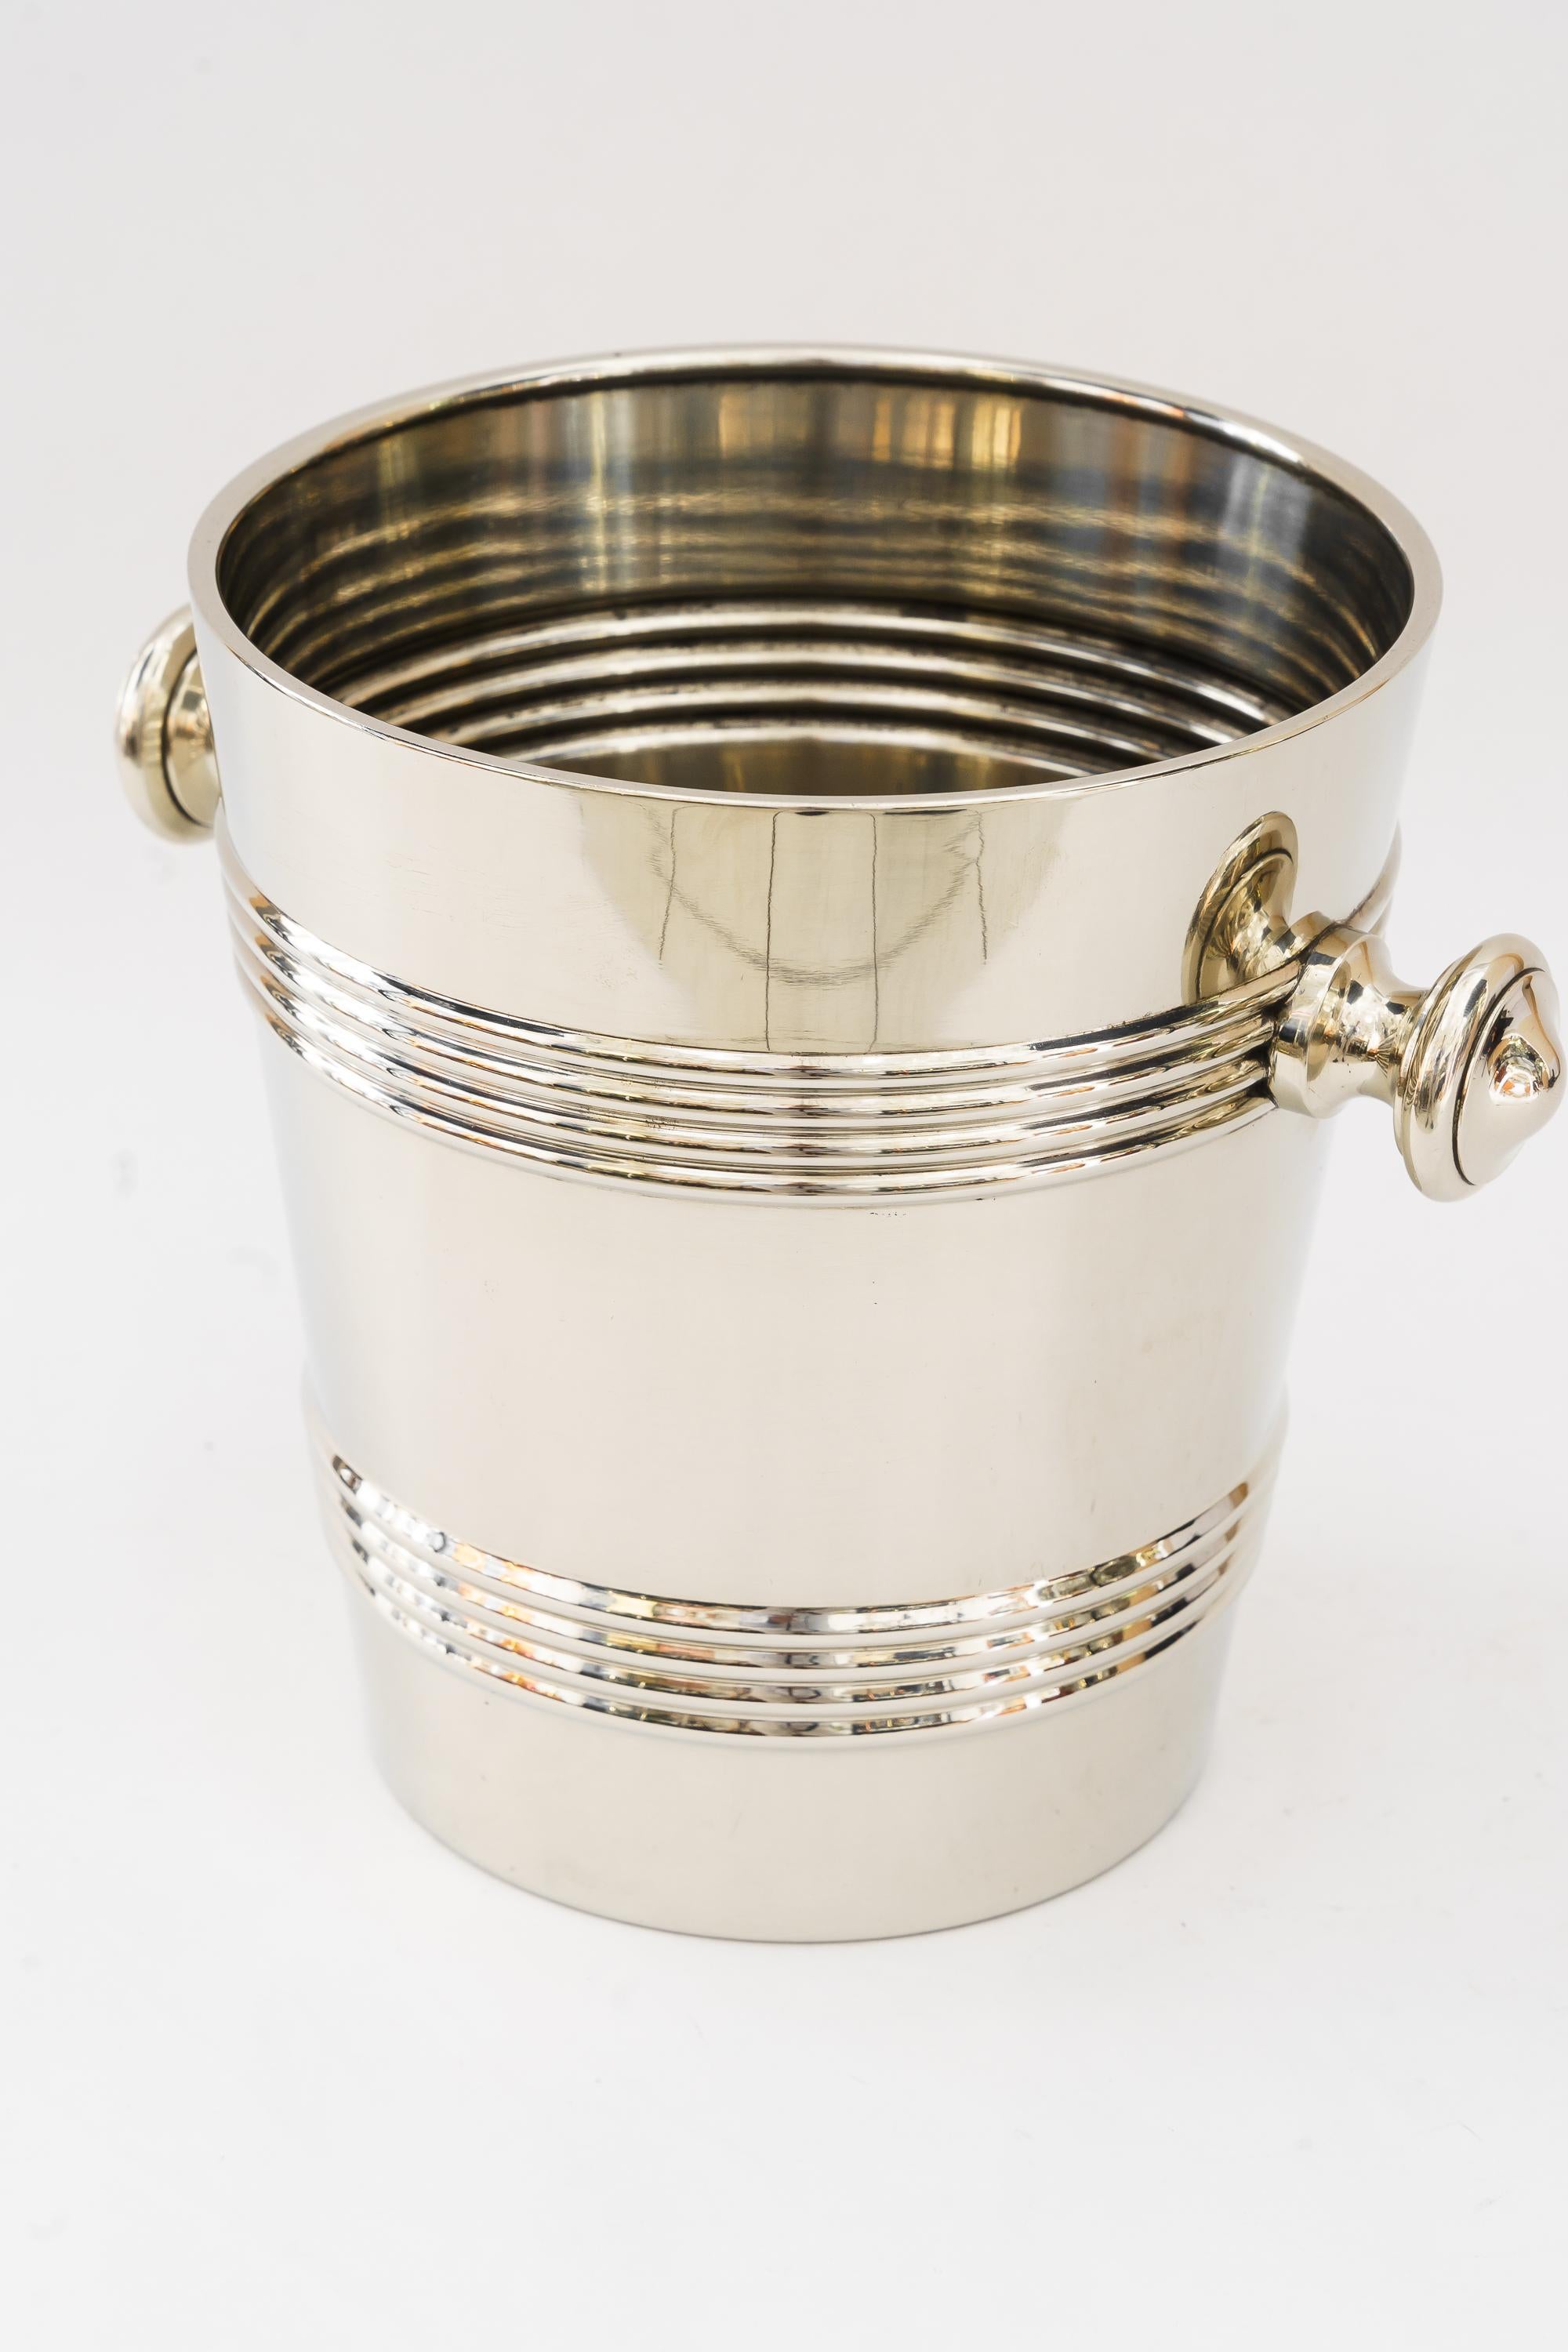 2 Champagne Buckets Round, 1920s 'Alpaca ' by Berndorf ( marked )
Only Polished 
